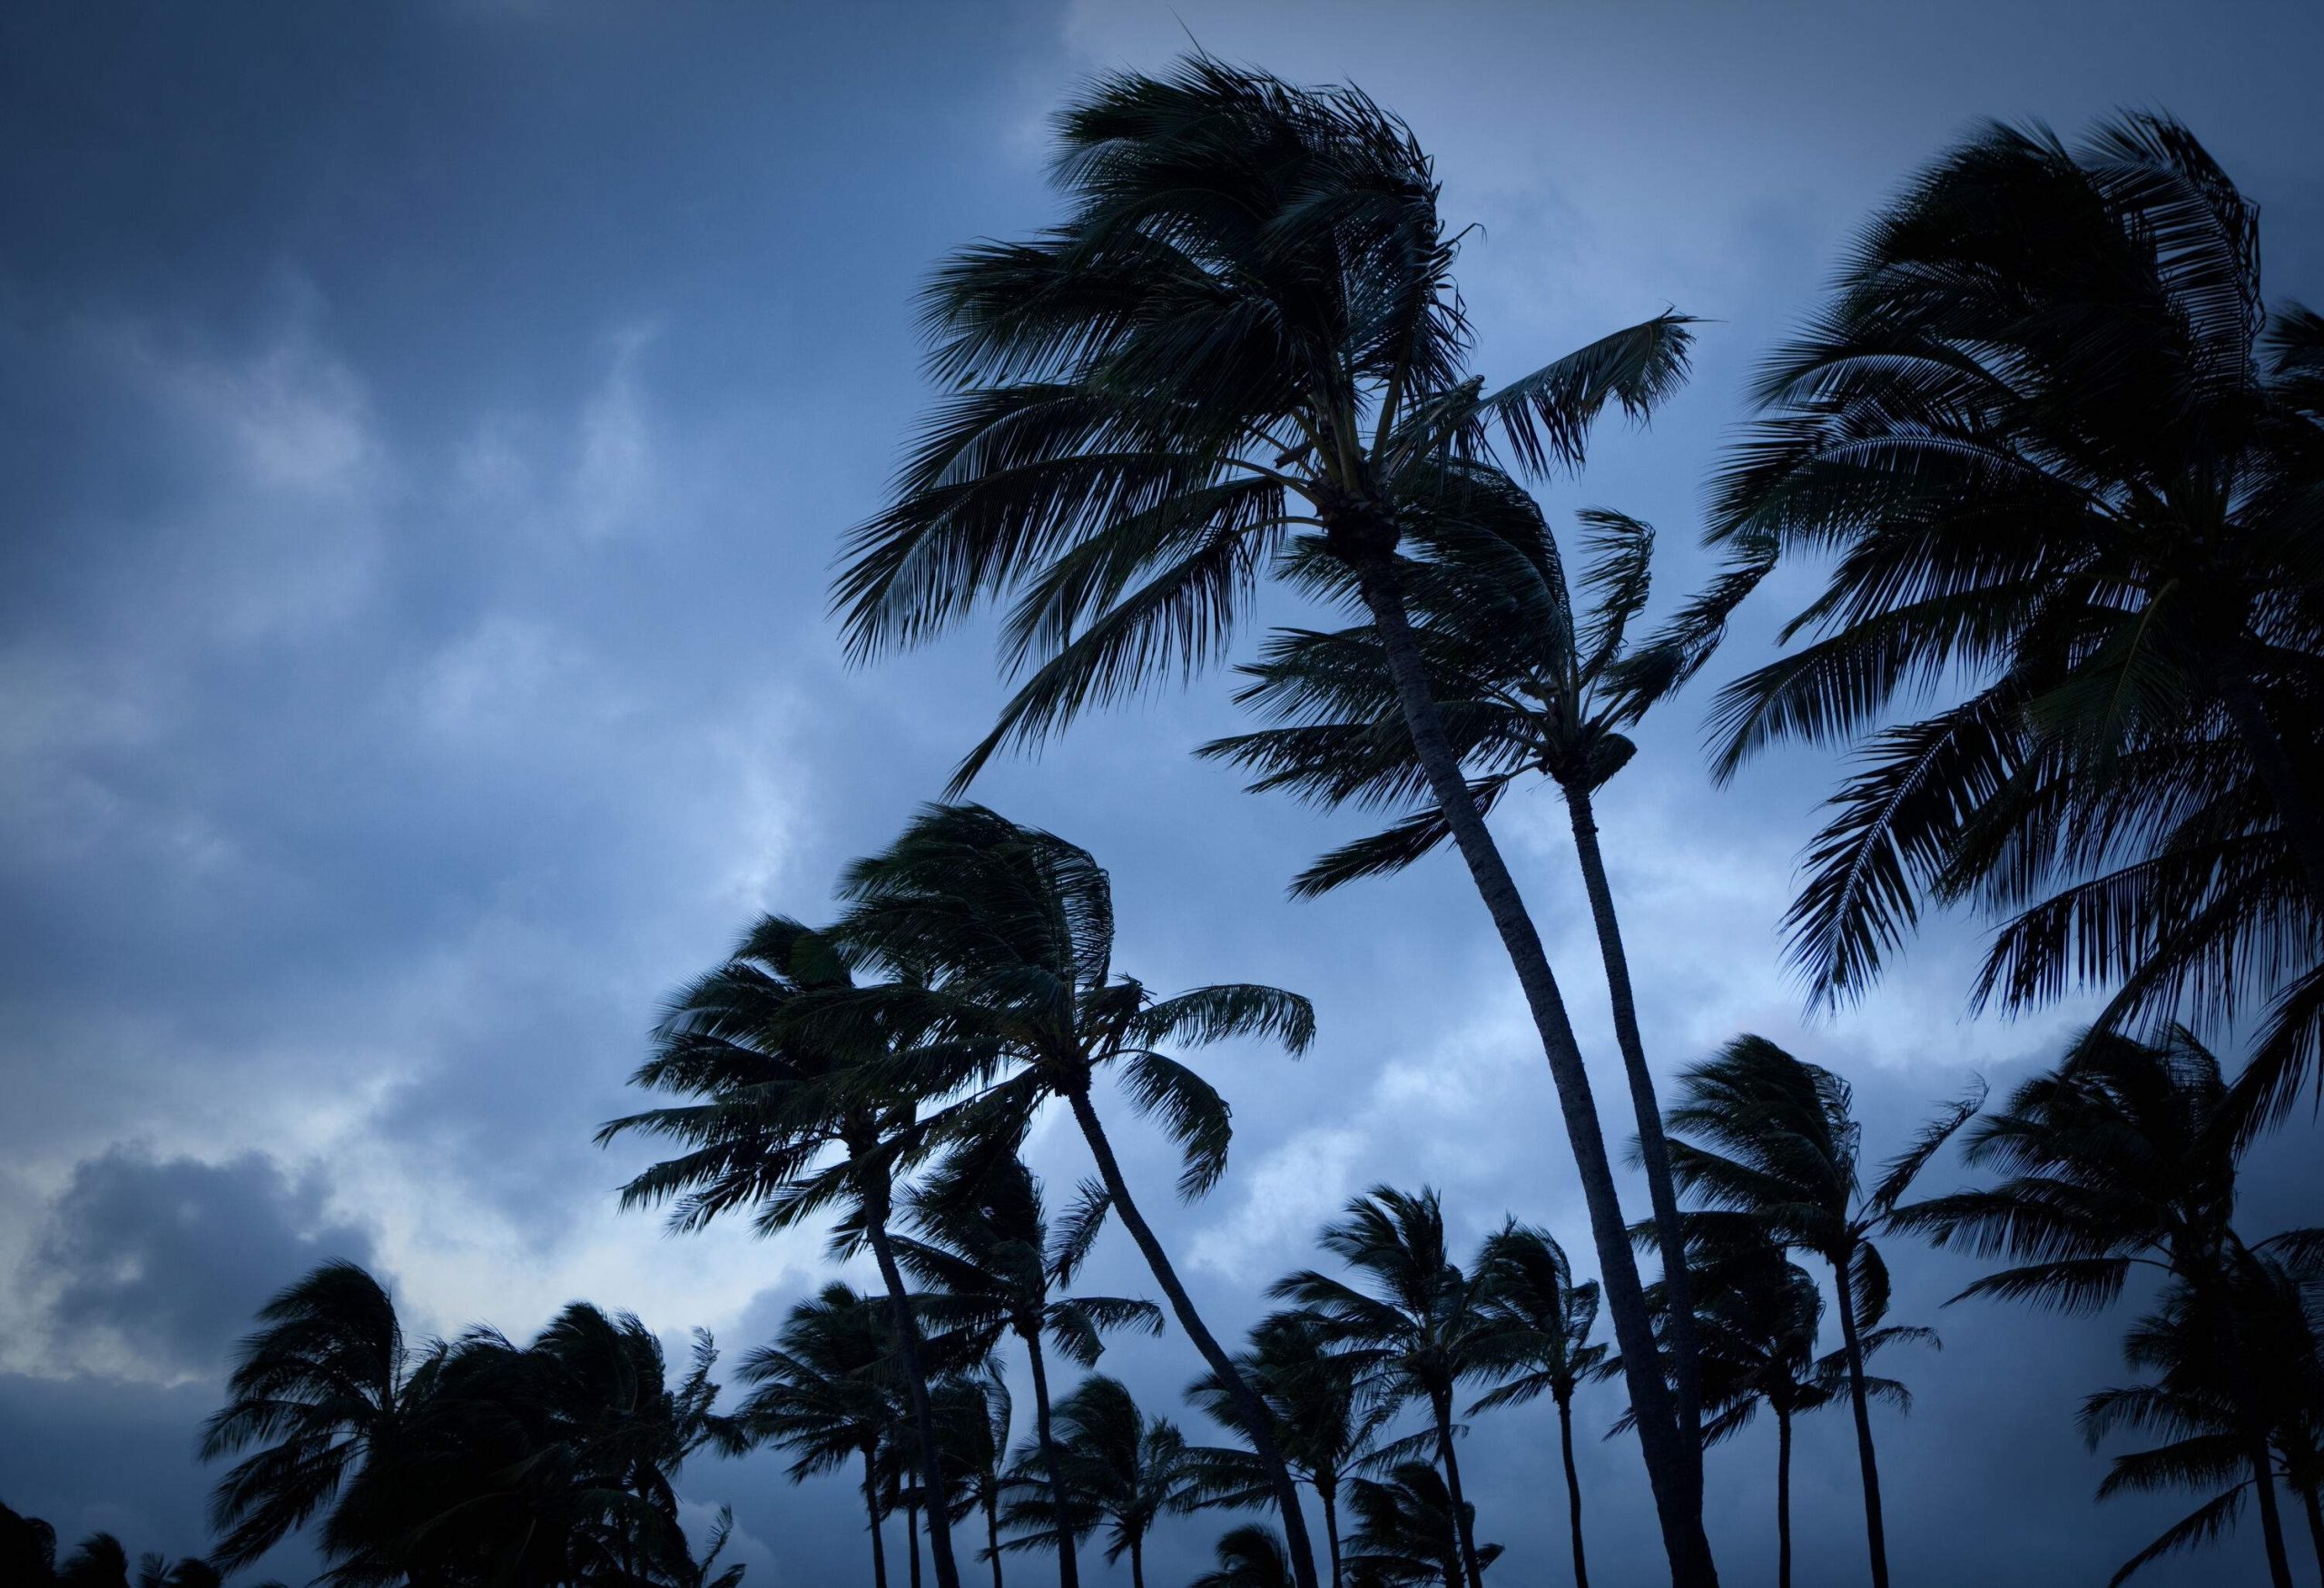 Palm trees in high wind with stormy sky in the background.